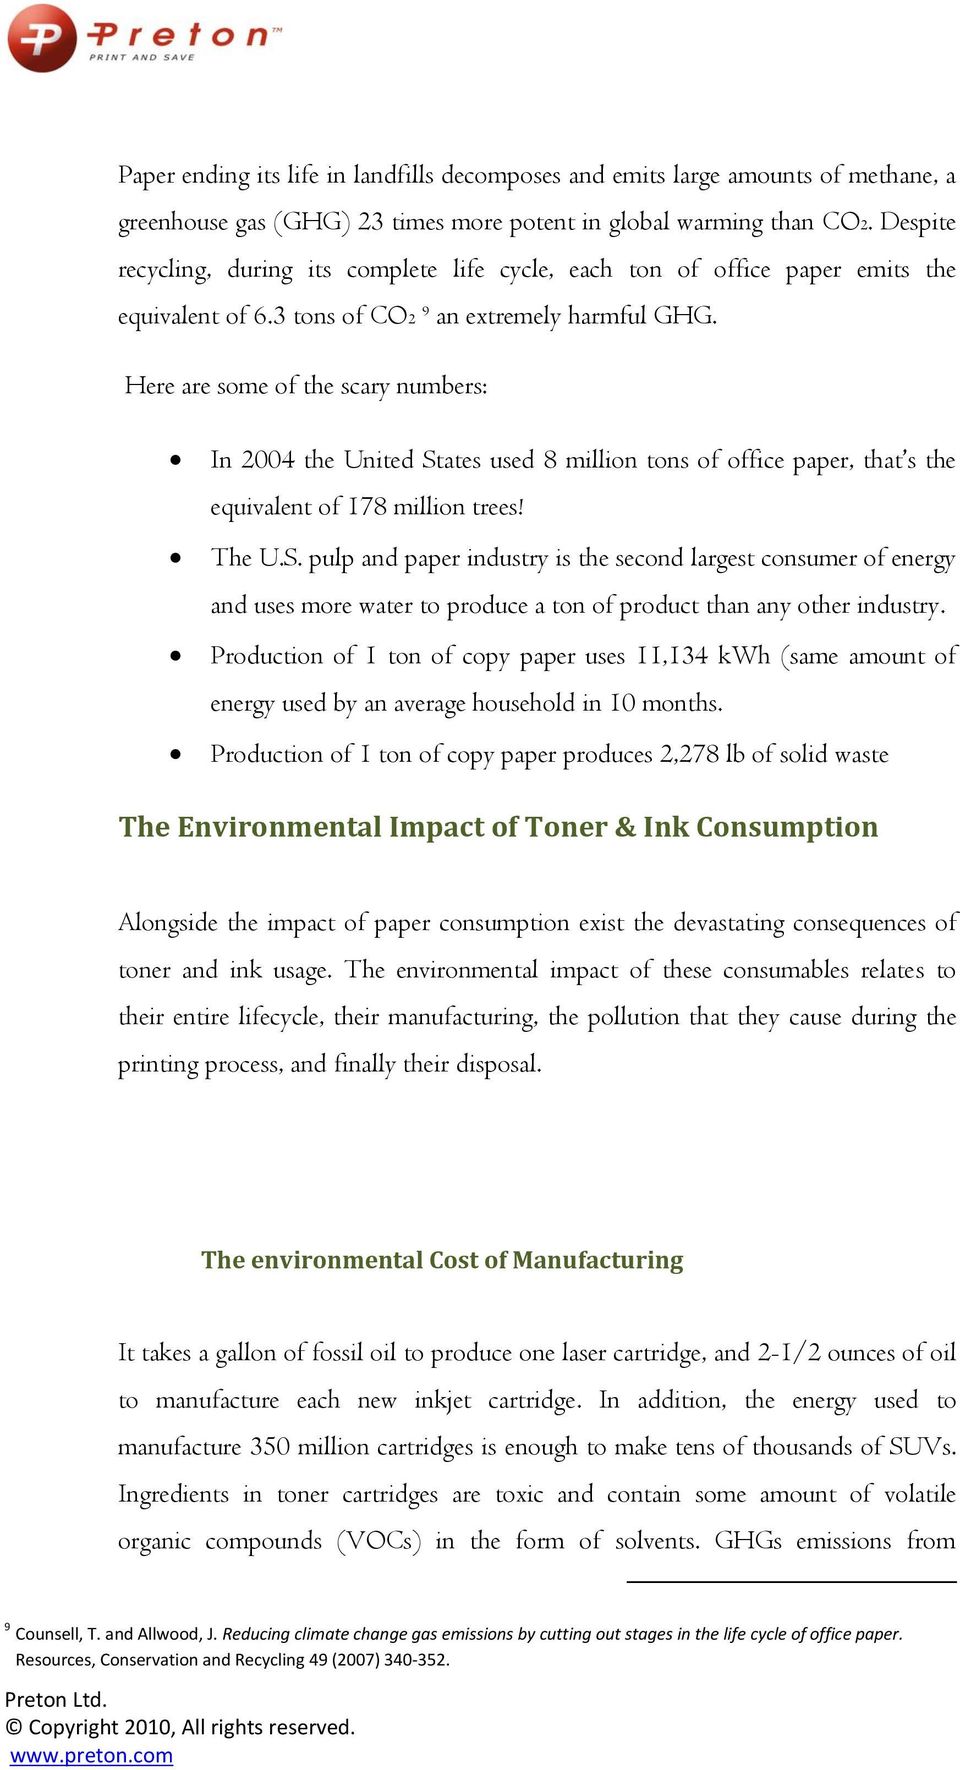 Here are some of the scary numbers: In 2004 the United States used 8 million tons of office paper, that s the equivalent of 178 million trees! The U.S. pulp and paper industry is the second largest consumer of energy and uses more water to produce a ton of product than any other industry.